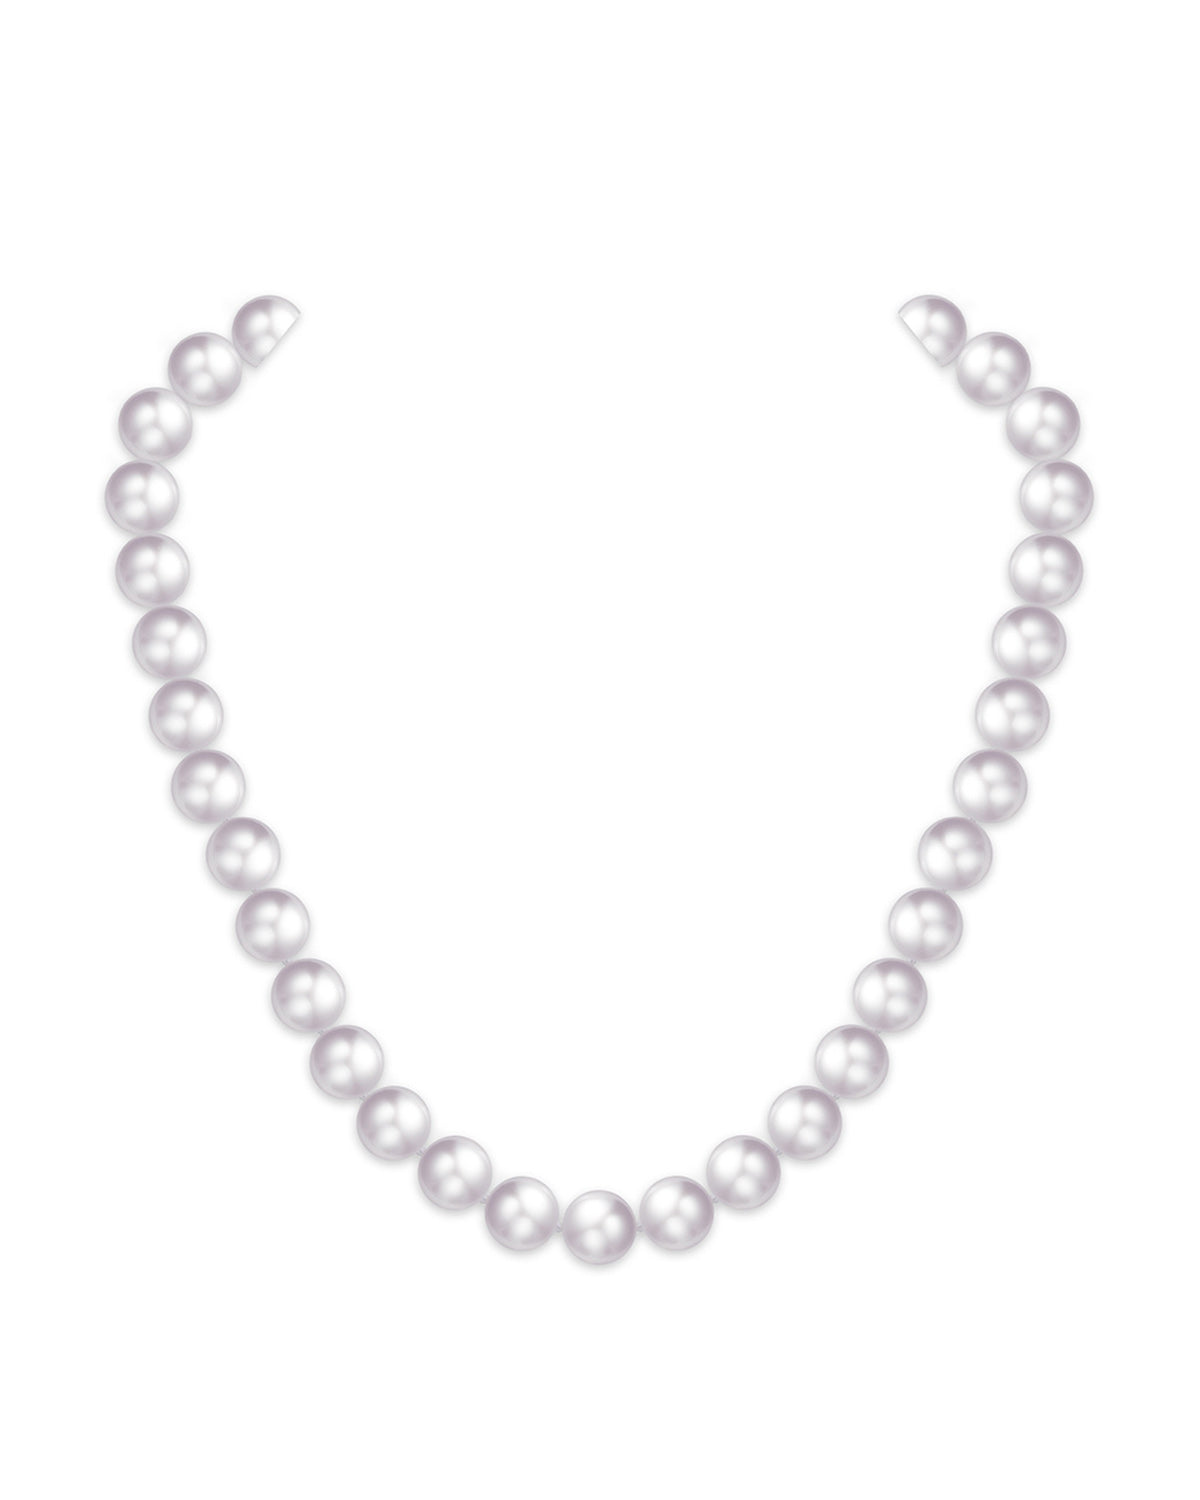 8.5-9.0mm White Freshwater Pearl Necklace - AAAA Quality - Preala Jewels #